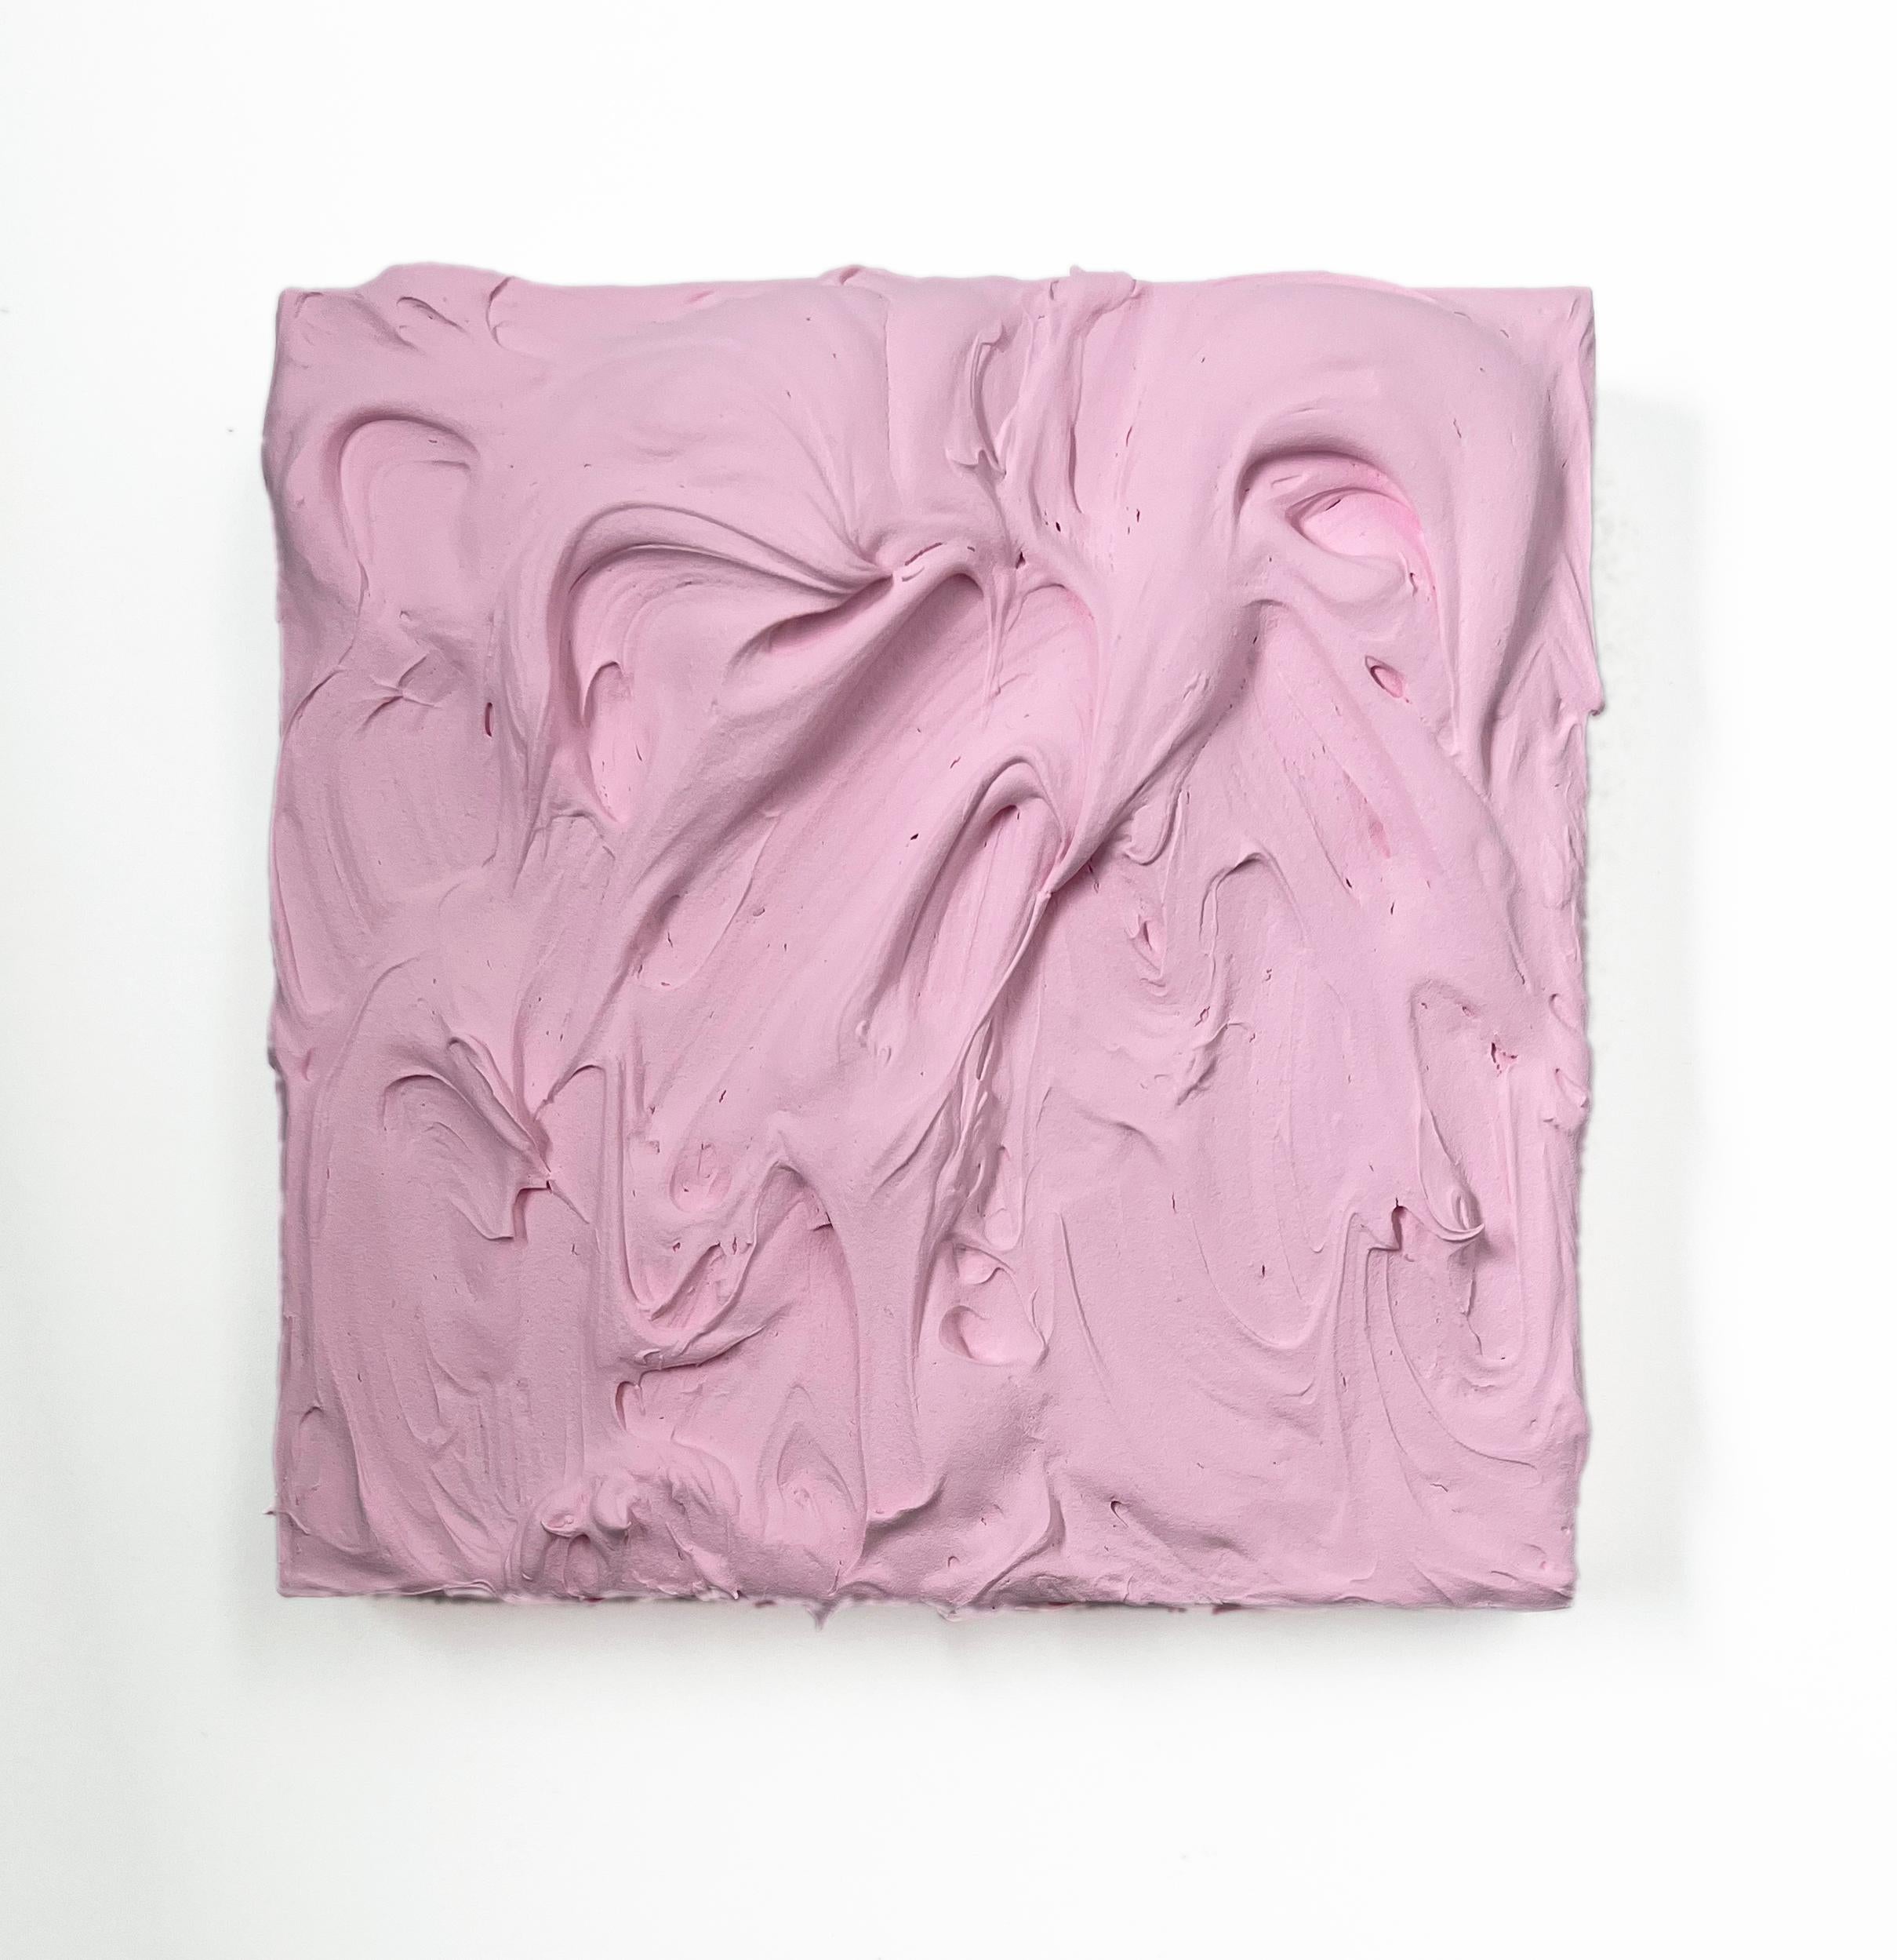 Chloe Hedden Abstract Sculpture - Baby Pink Excess (rose impasto thick painting monochrome pop square design)